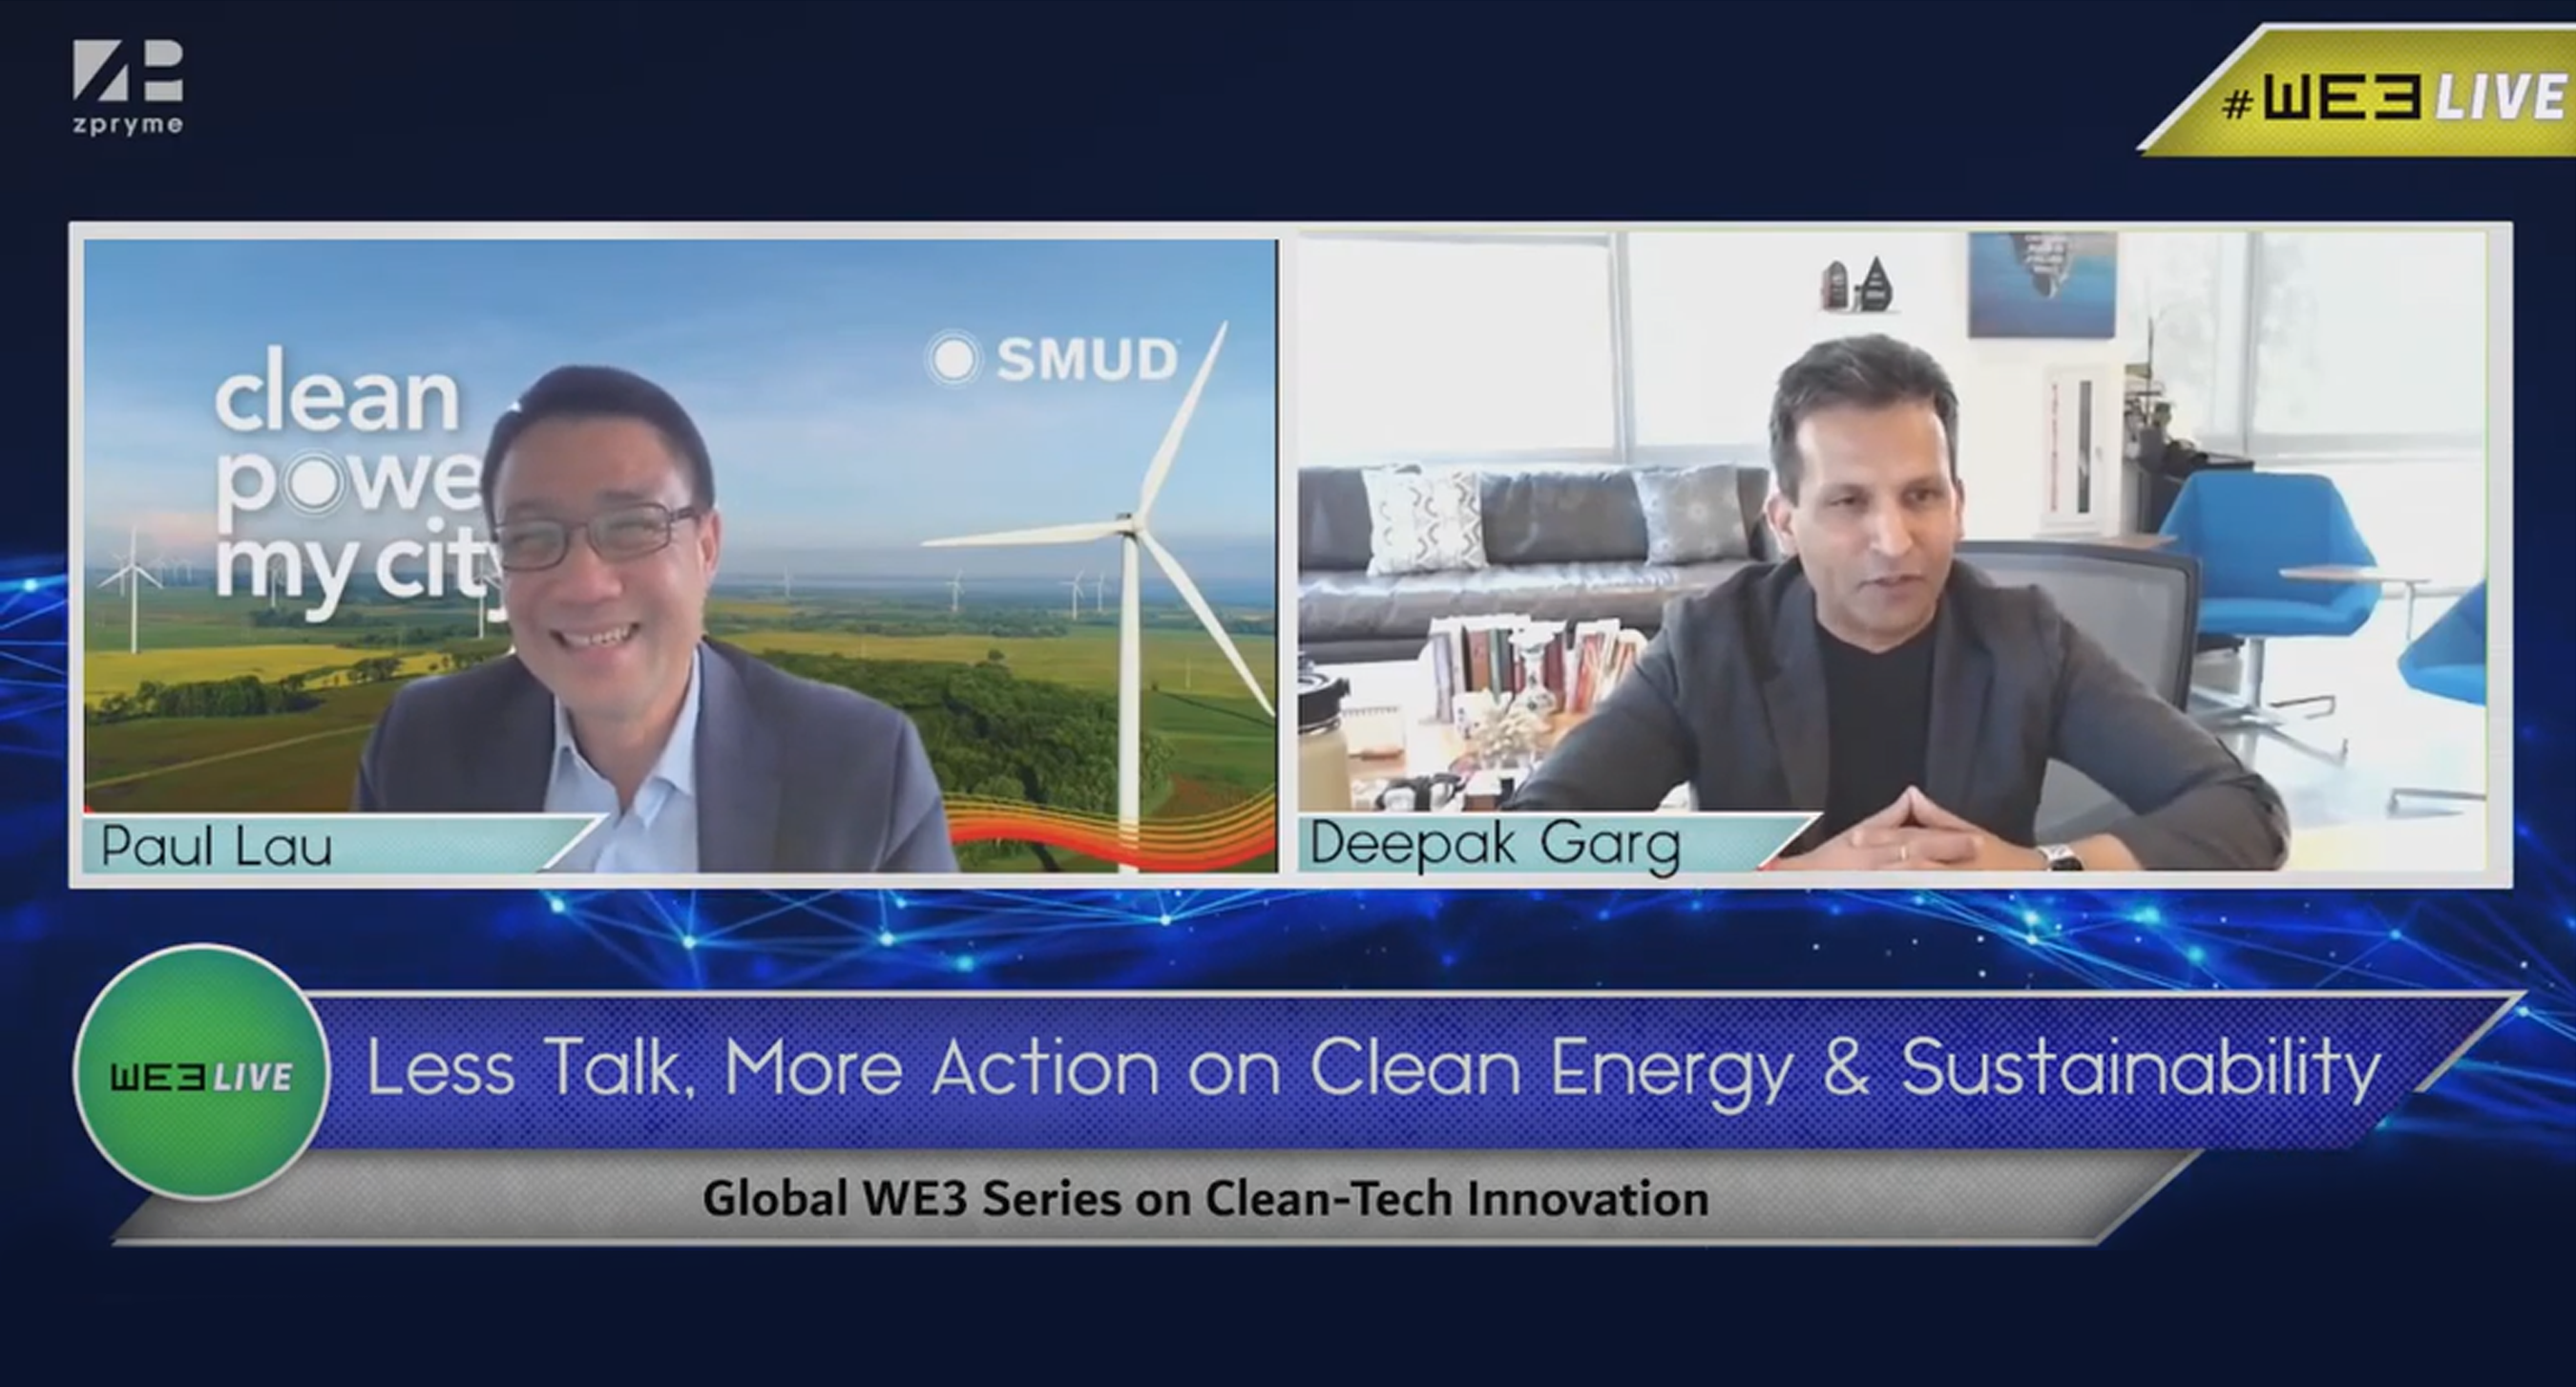 Less talk and more action on clean energy & sustai...